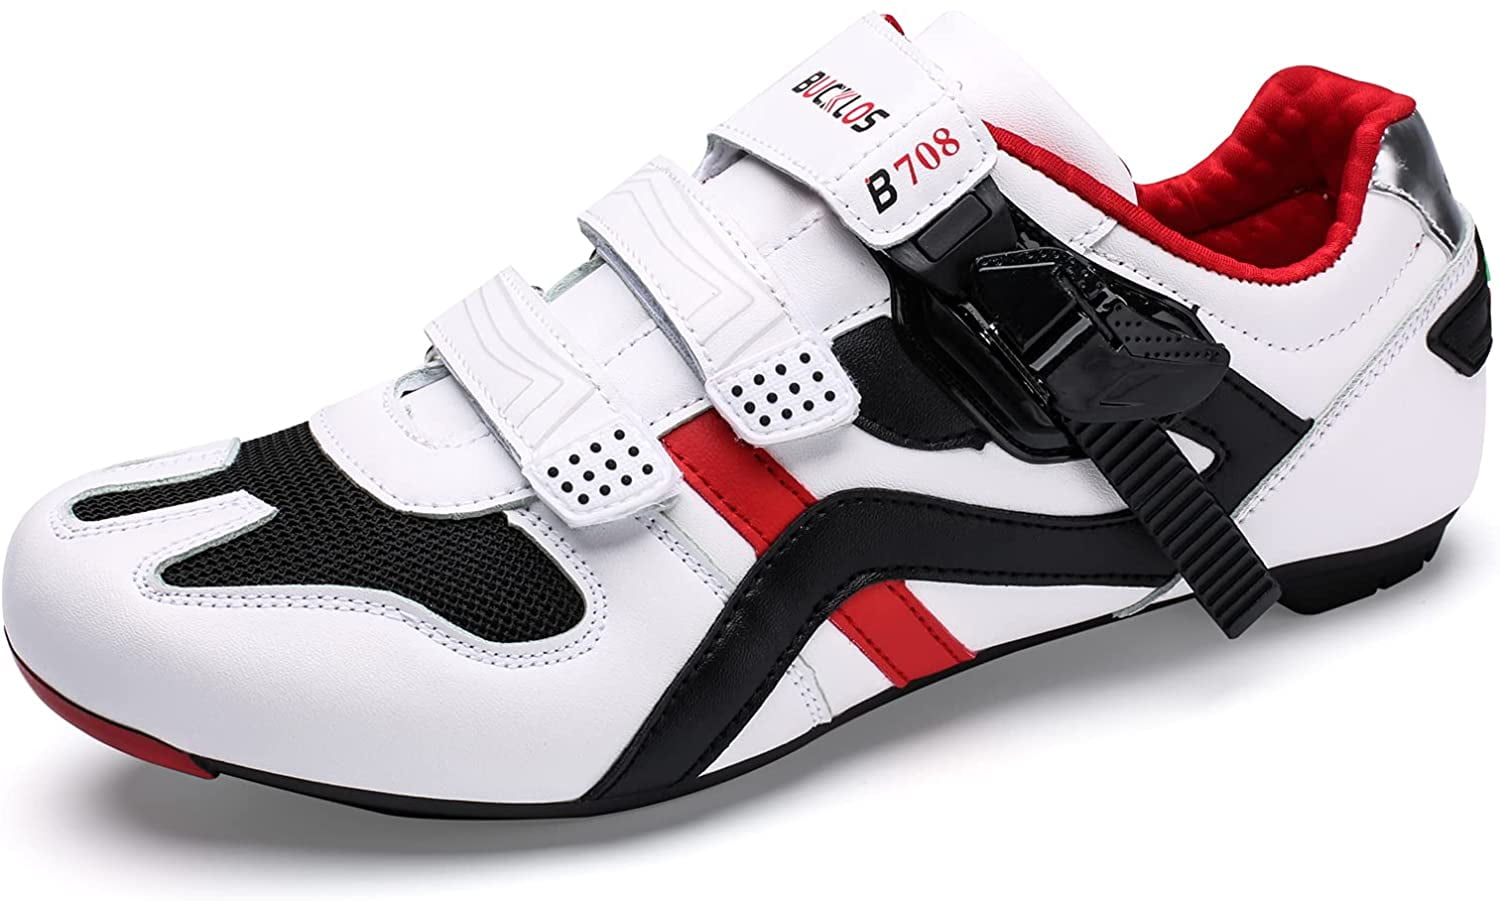 Peloton Shoes Outdoor Sport Cycling Shoes MTB Bicycle Men Road Bike Sneakers 